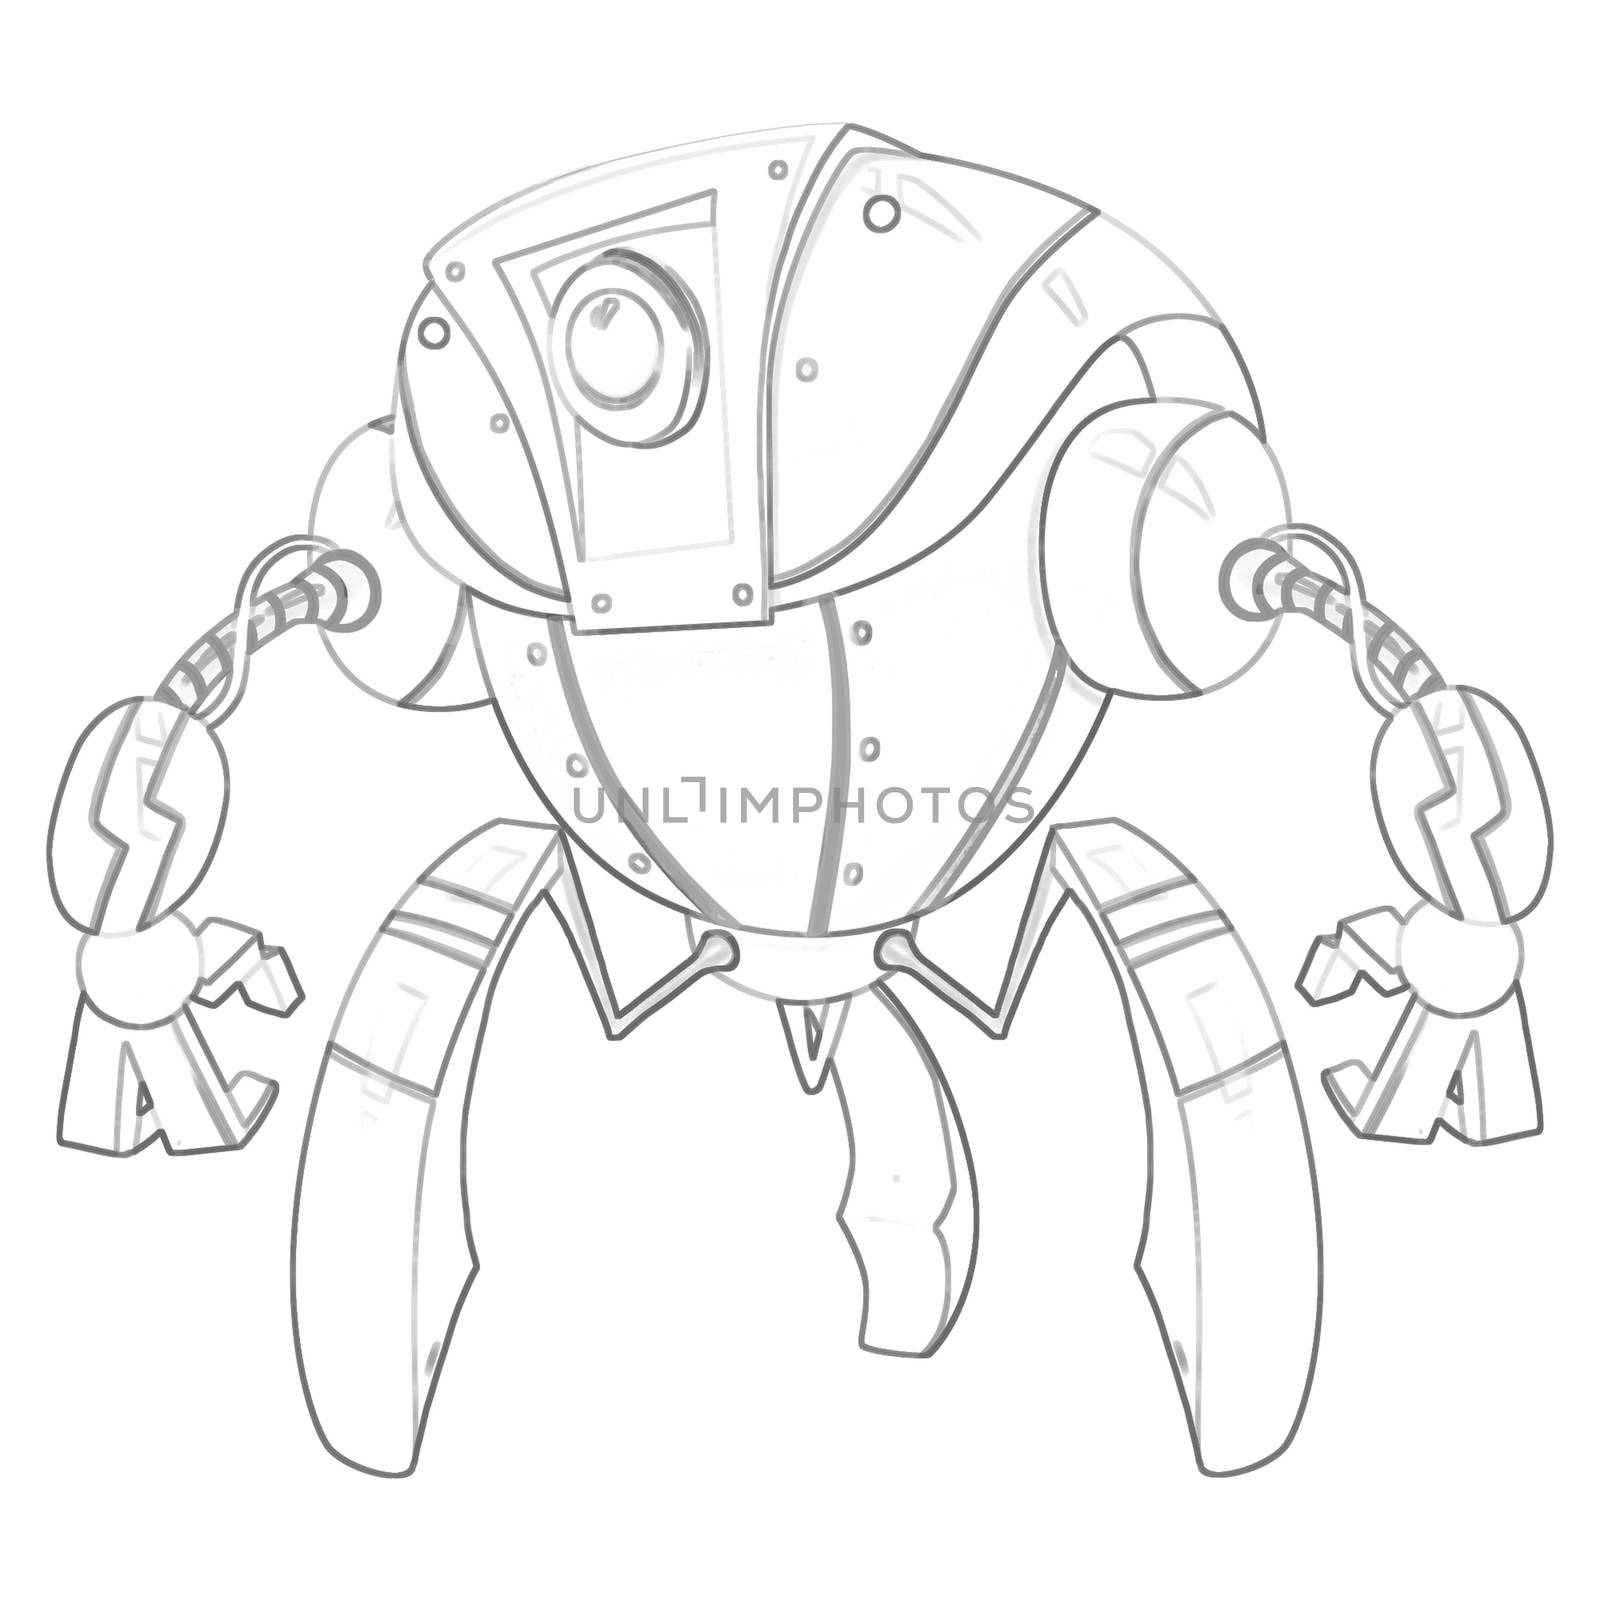 Illustration: Coloring Book Series: Robot. Soft thin line. Print it and bring it to Life with Color! Fantastic Outline / Sketch / Line Art Design. by NextMars